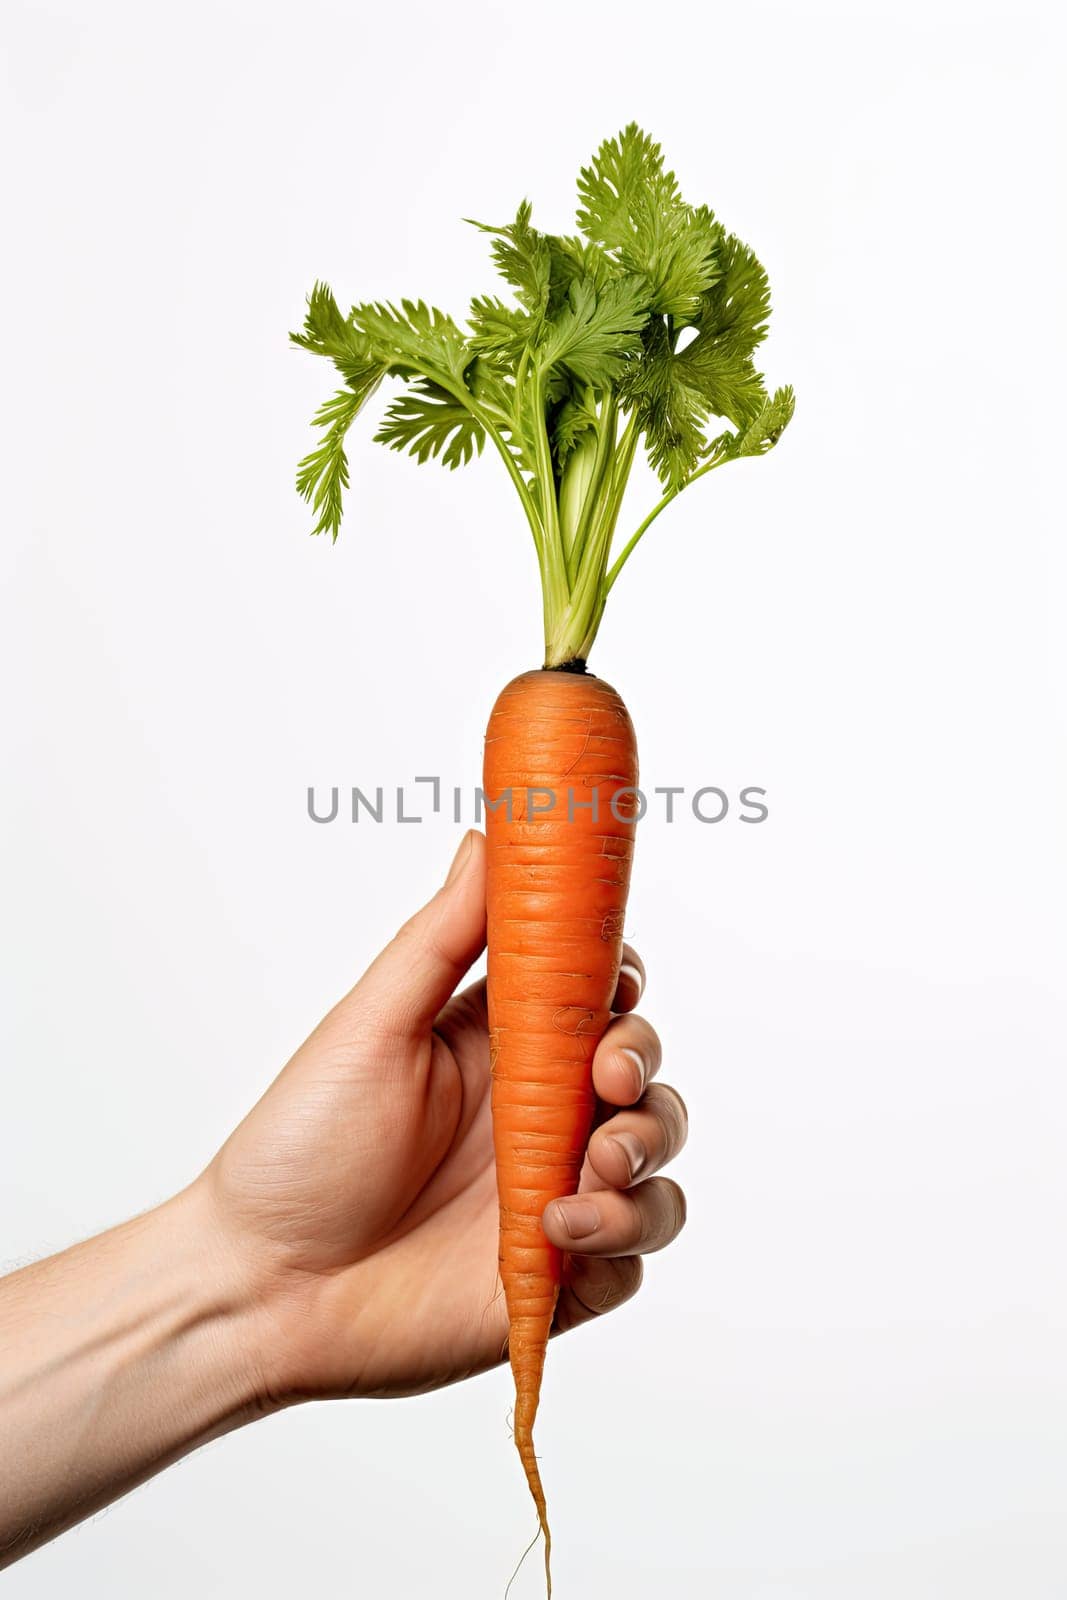 Human hand holding a ripe carrot isolated on white background.